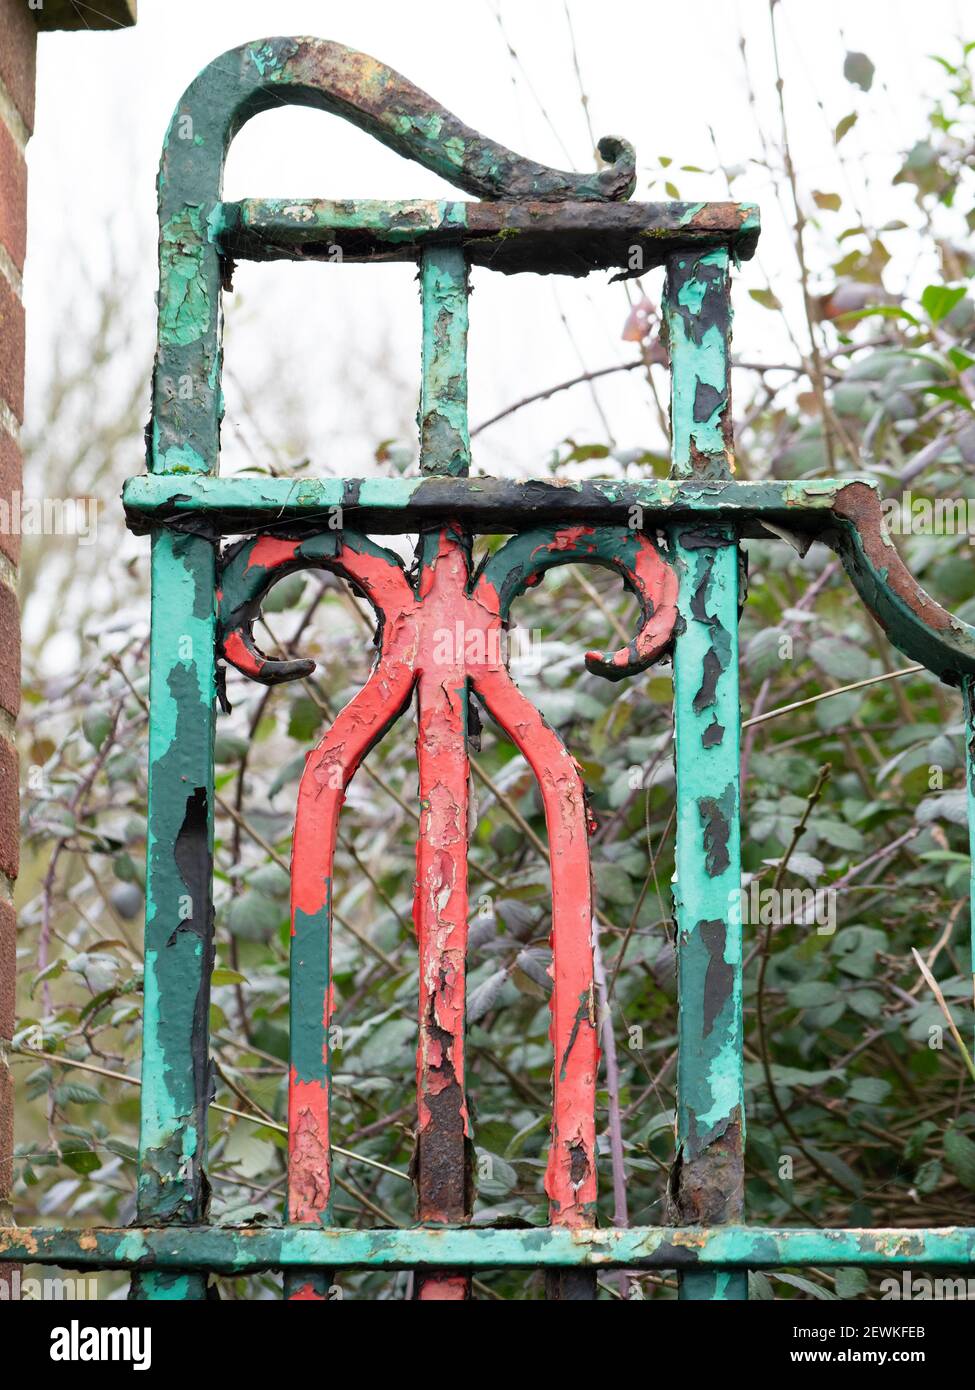 Wrought iron park gate in poor condition in Westbury, Wiltshire, England, UK. Stock Photo